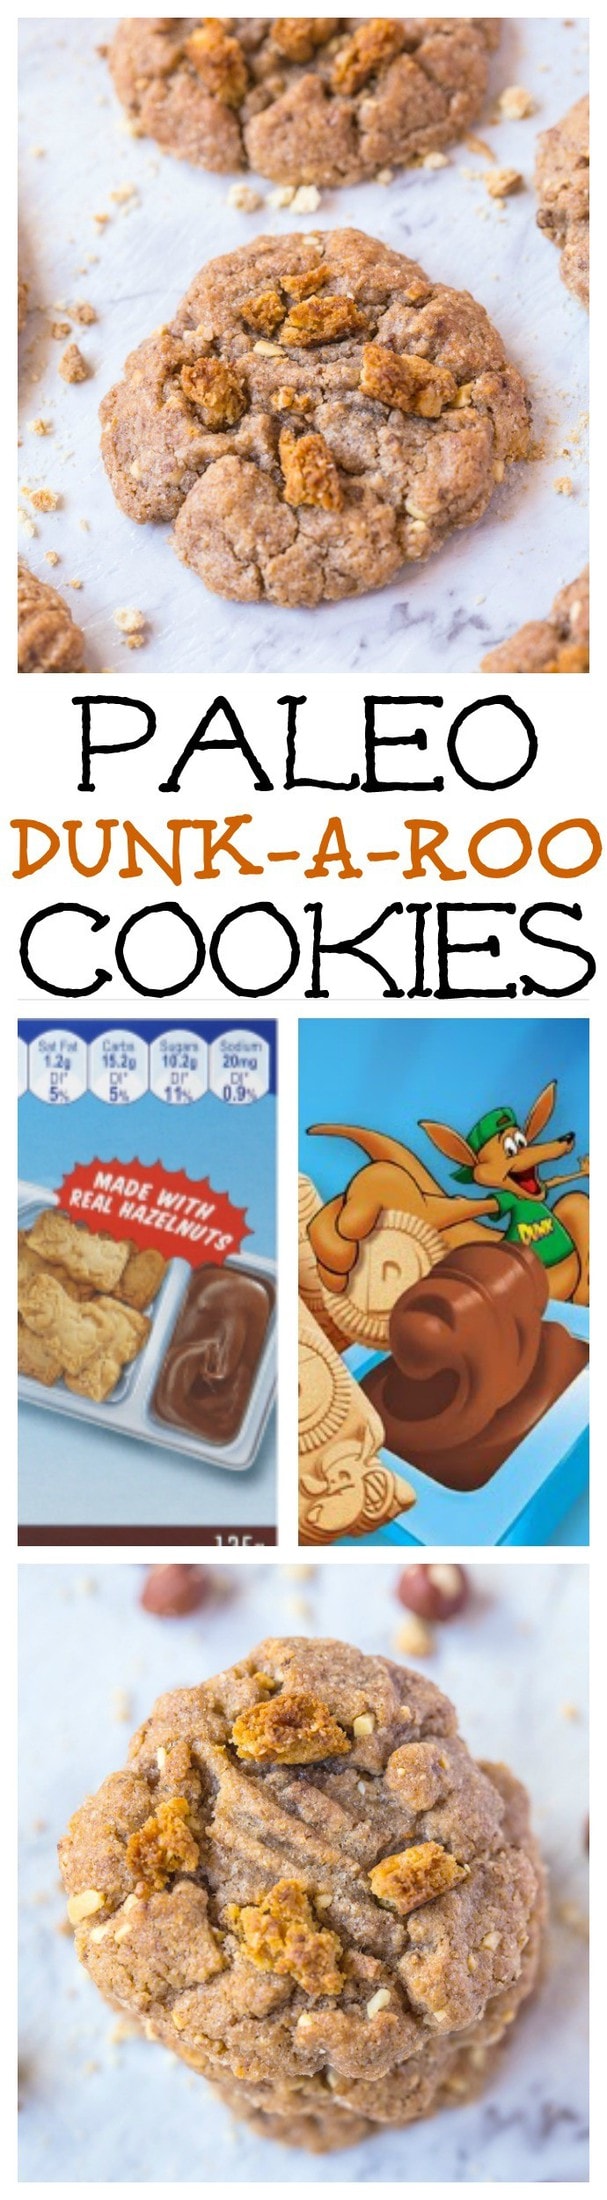 Paleo Dunkaroo Cookies- A childhood treat gets a healthier cookie makeover! Easy and delicious! {vegan, gluten free, grain free}